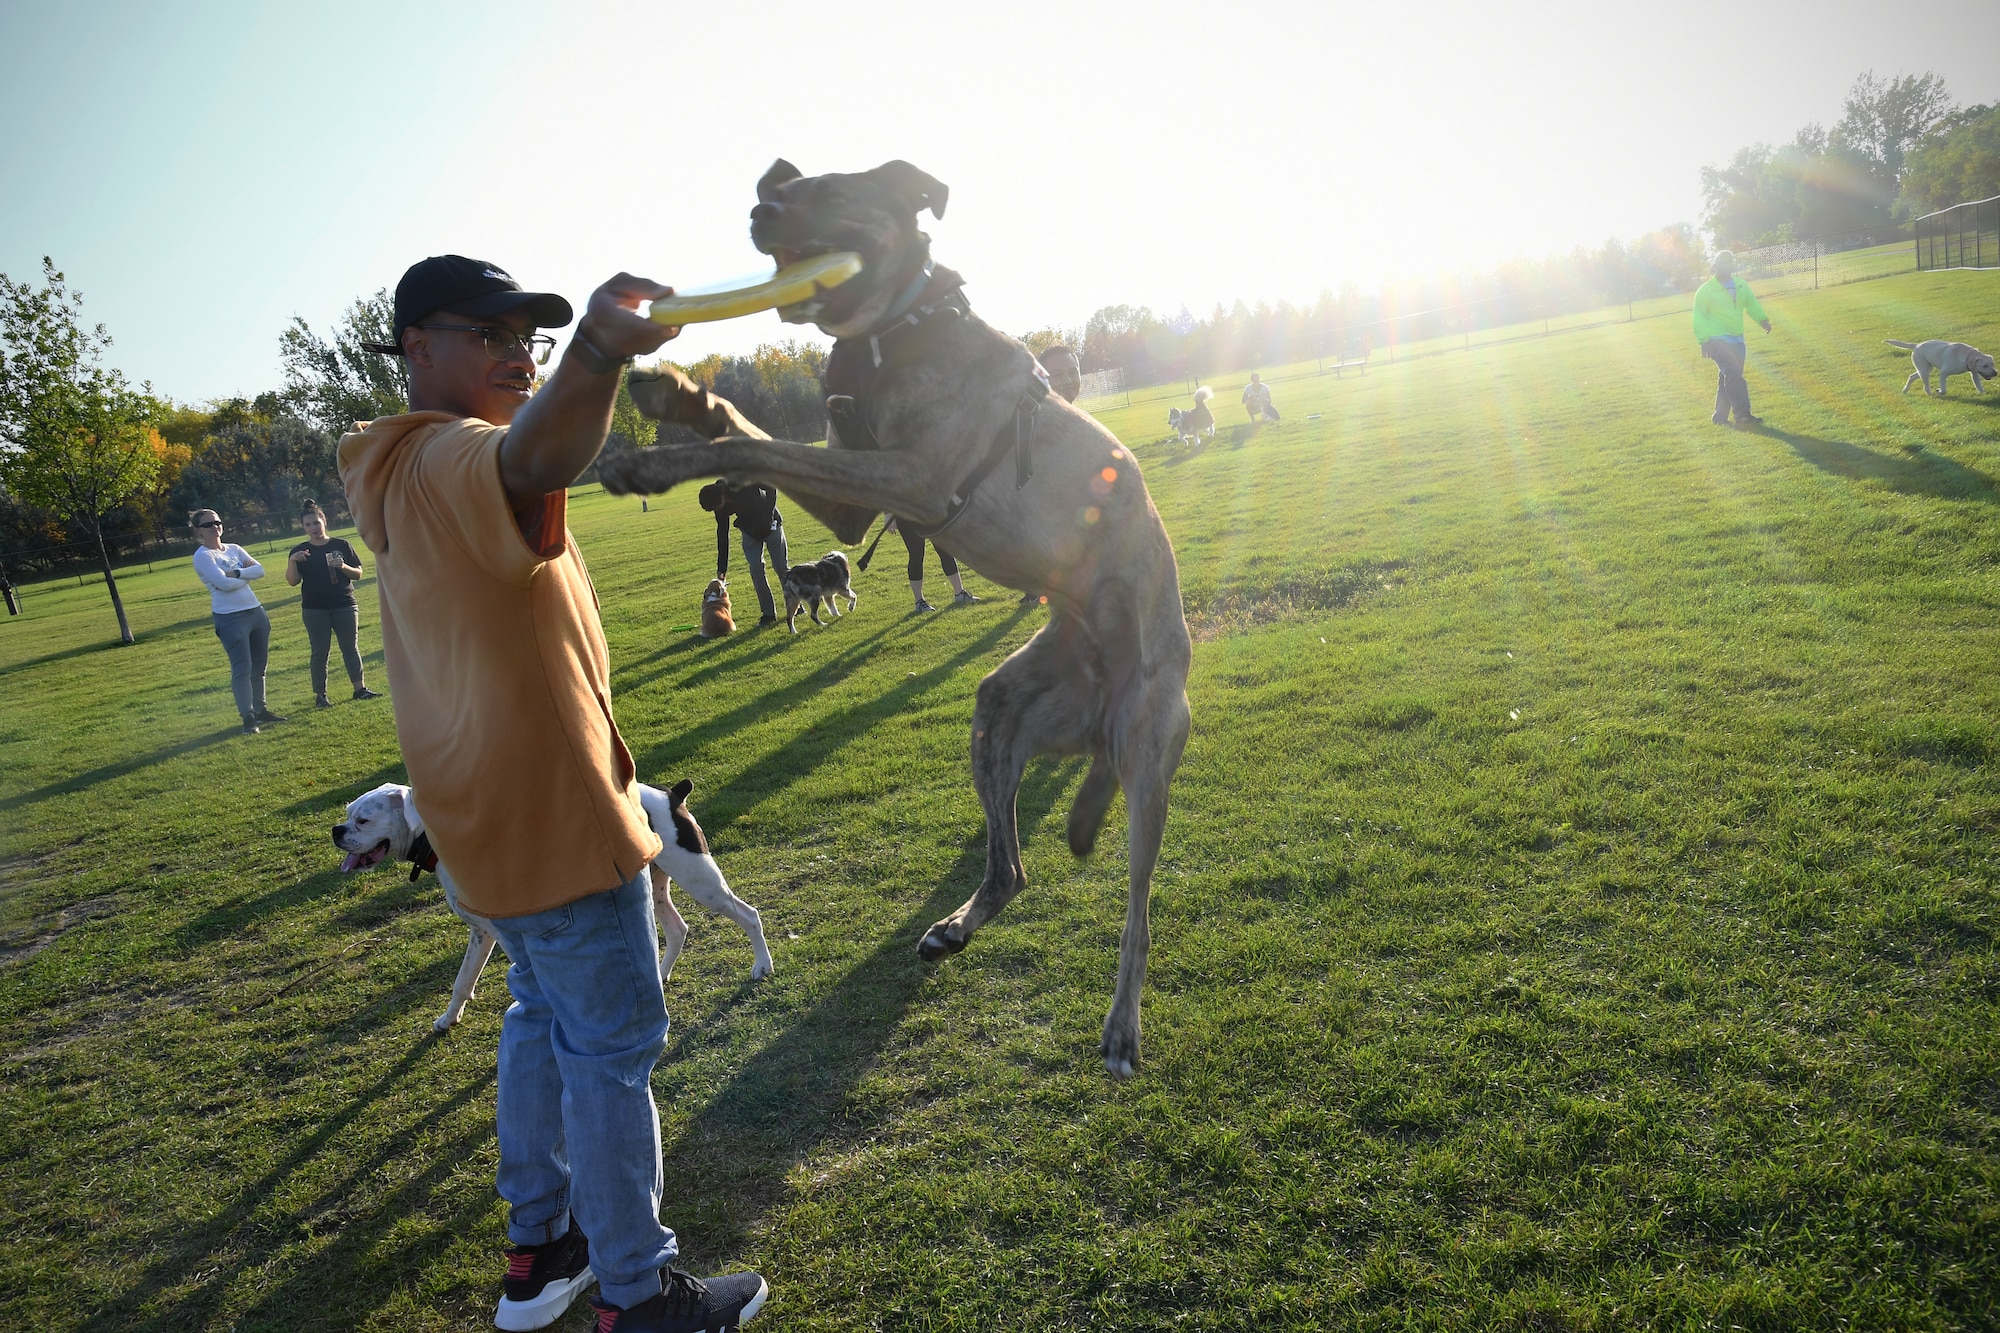 Senior Airman Elijaih Tiggs, 319th Reconnaissance Wing photojournalist journeyman, pets Memphis, his 2-year-old Australian Cattle Dog mix, as Memphis takes a play-break during “Tactical Paws” Sept. 18, 2019, at the dog park on Grand Forks Air Force Base, North Dakota. Tiggs and Memphis attended Tactical Paws, a casual event created to allow the base community to socialize, exercise their dogs and share helpful tips regarding local animal care options. (U.S. Air Force photo by Senior Airman Elora J. Martinez)